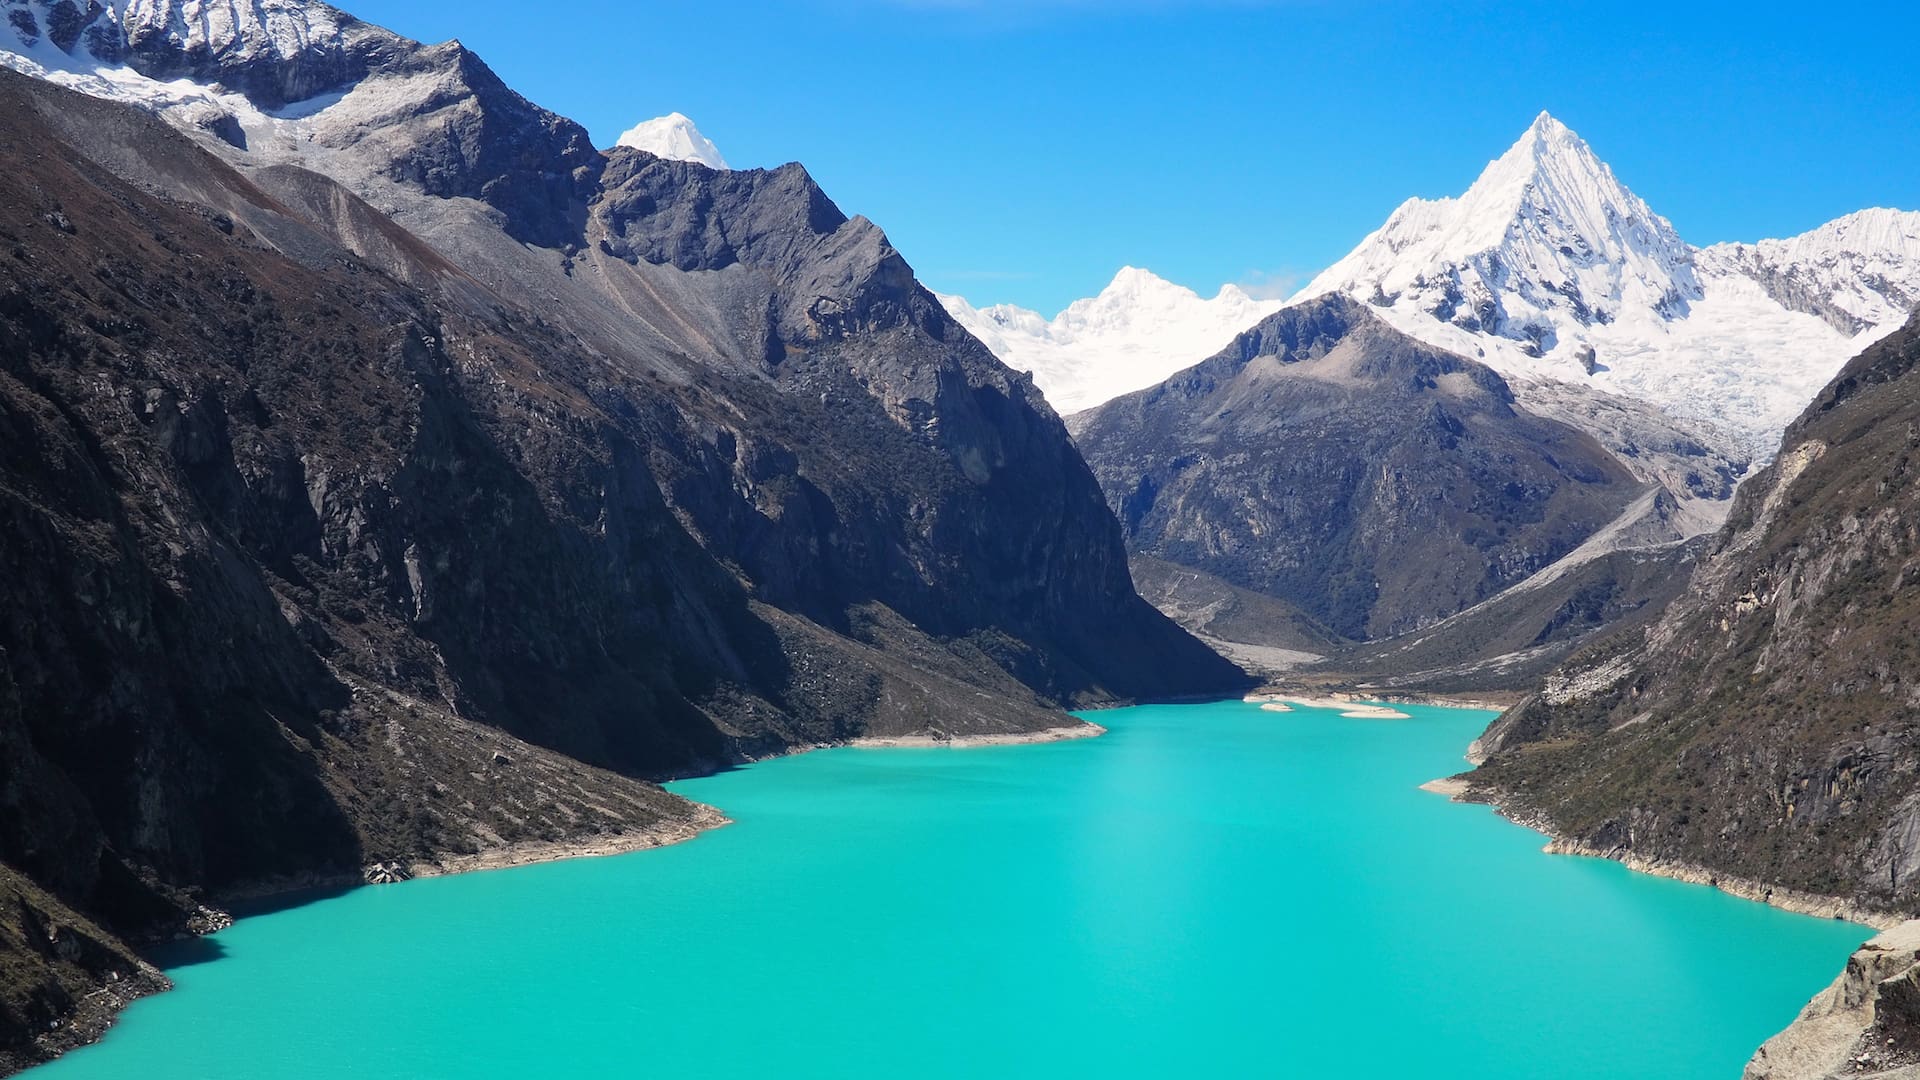 Turquoise lake in the foreground, snowy mountains in the background